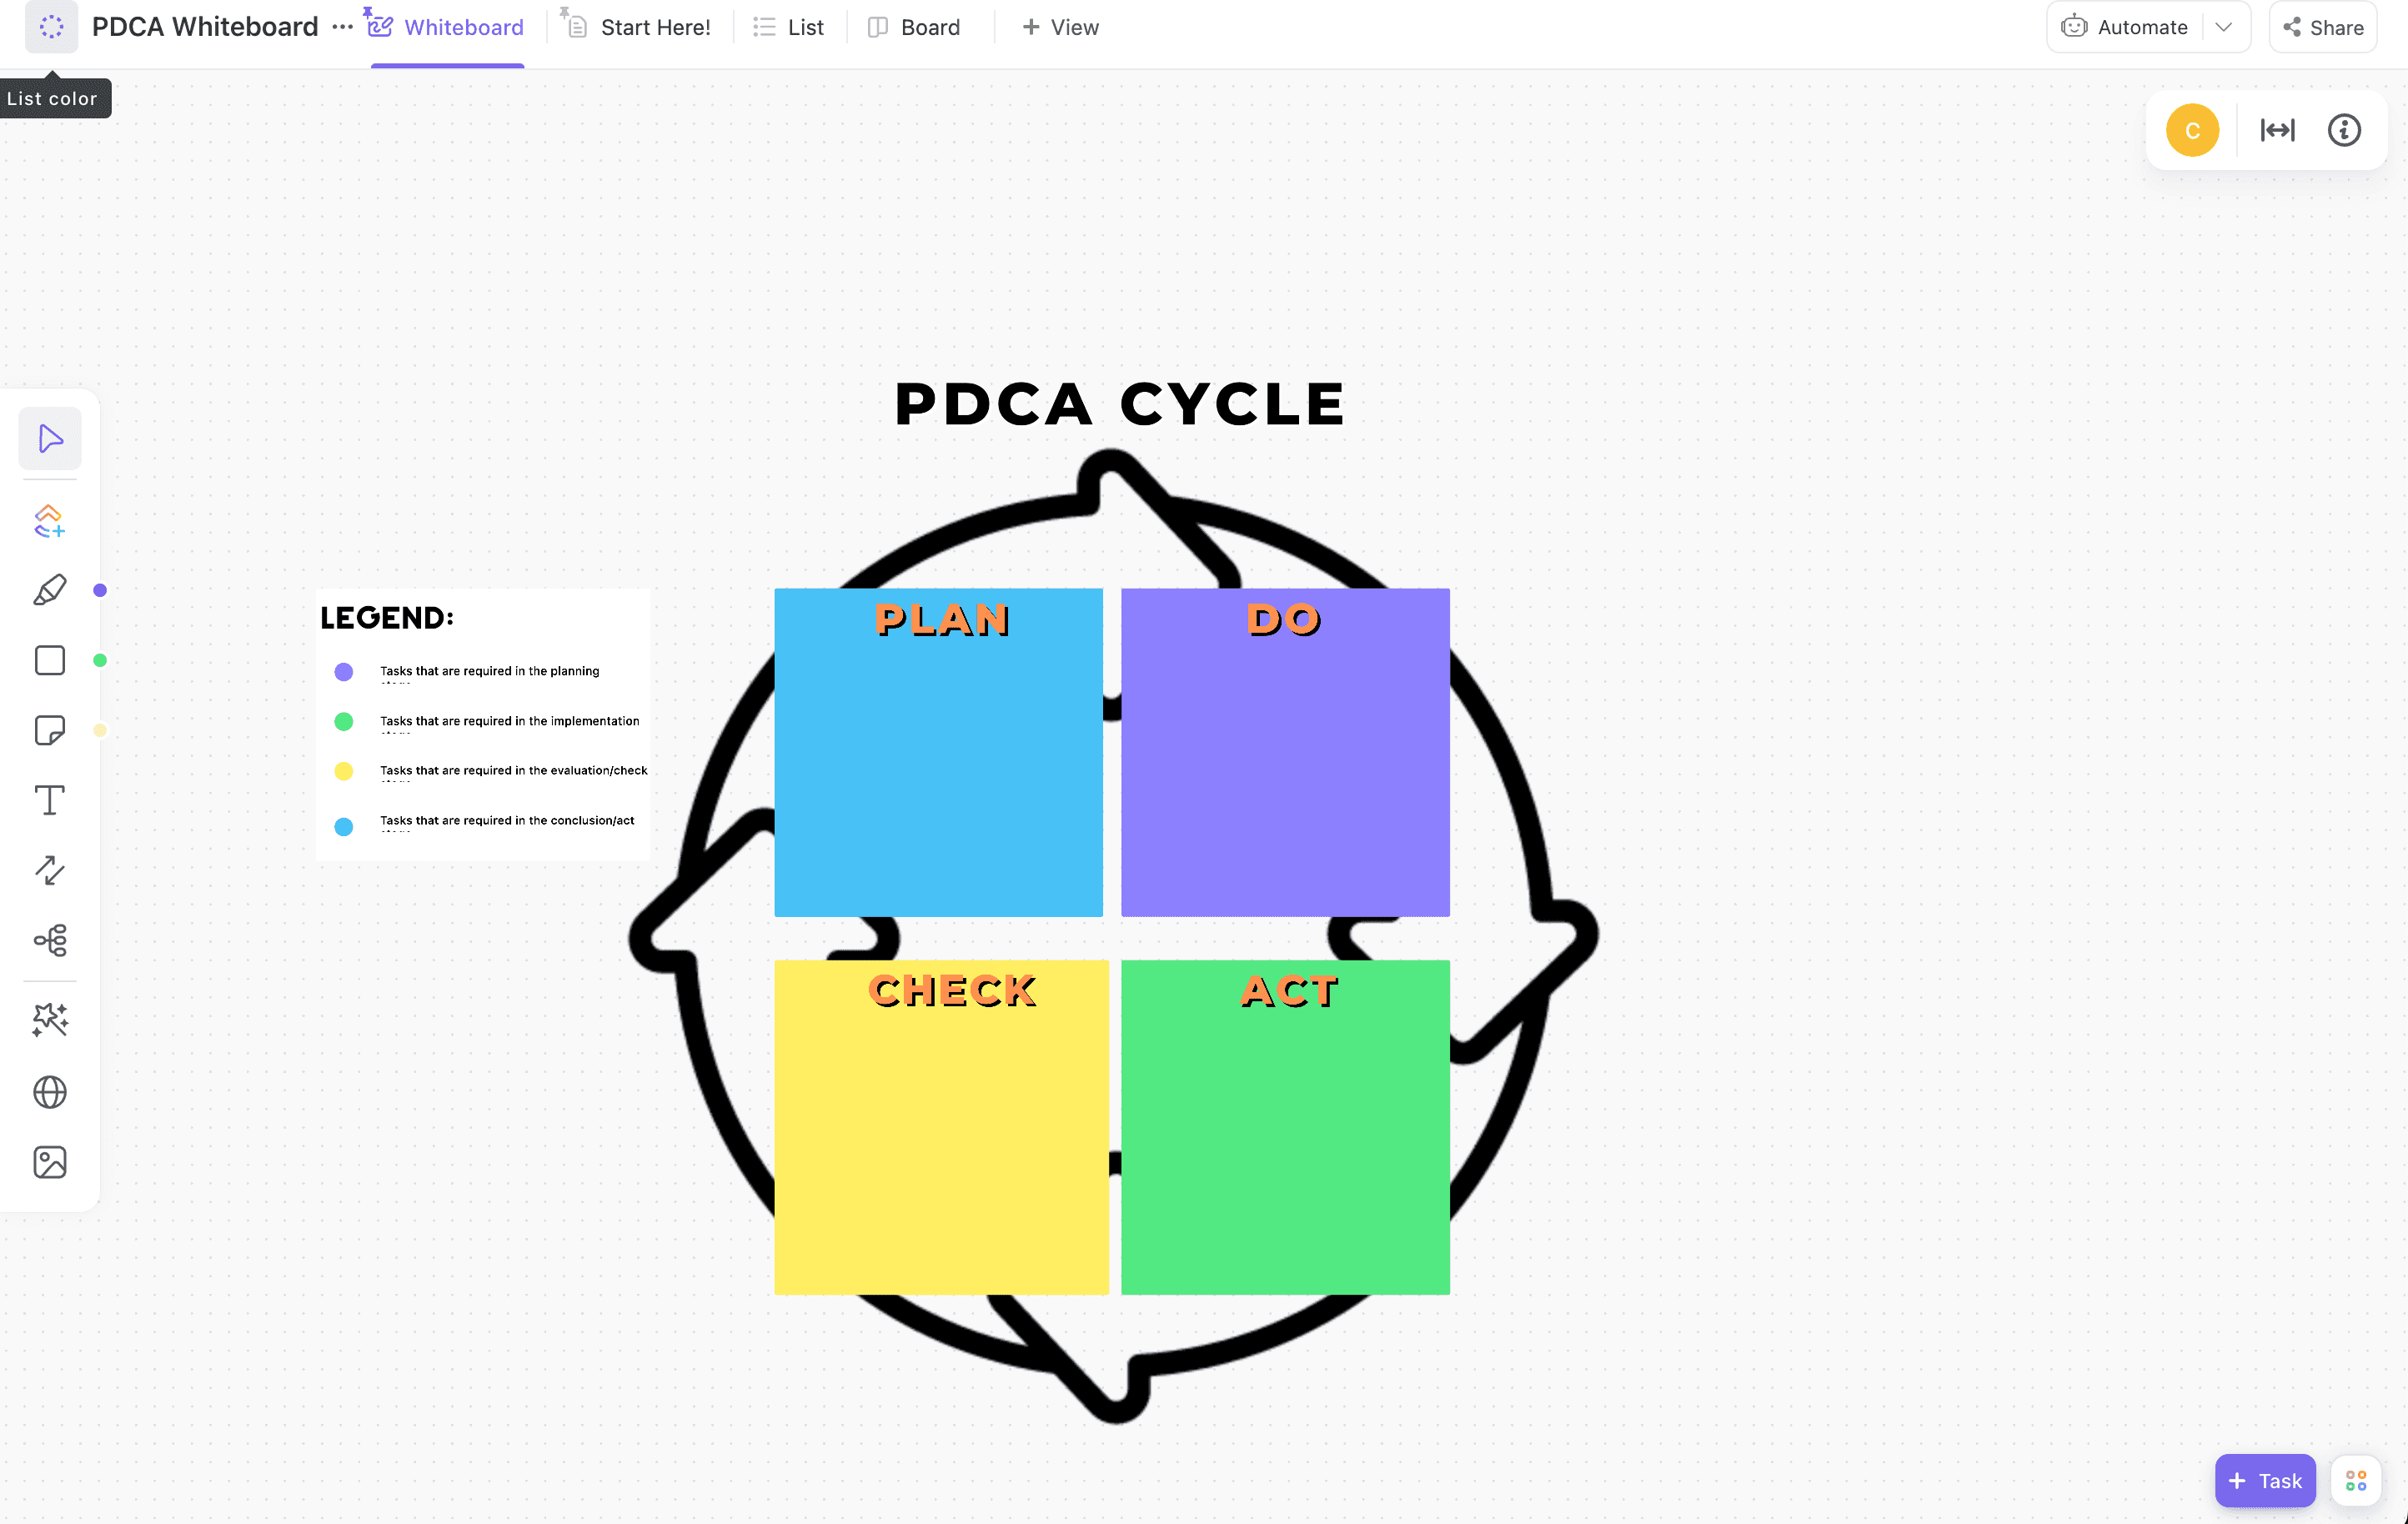 PDCA Process also called Continuous Improvement is a visual tool that categorizes all tasks into four stages: Plan, Do, Check, and Act. It breaks down tasks into smaller steps to identify the crucial area of the process. The ClickUp Whiteboard is a great way to execute the PDCA process.